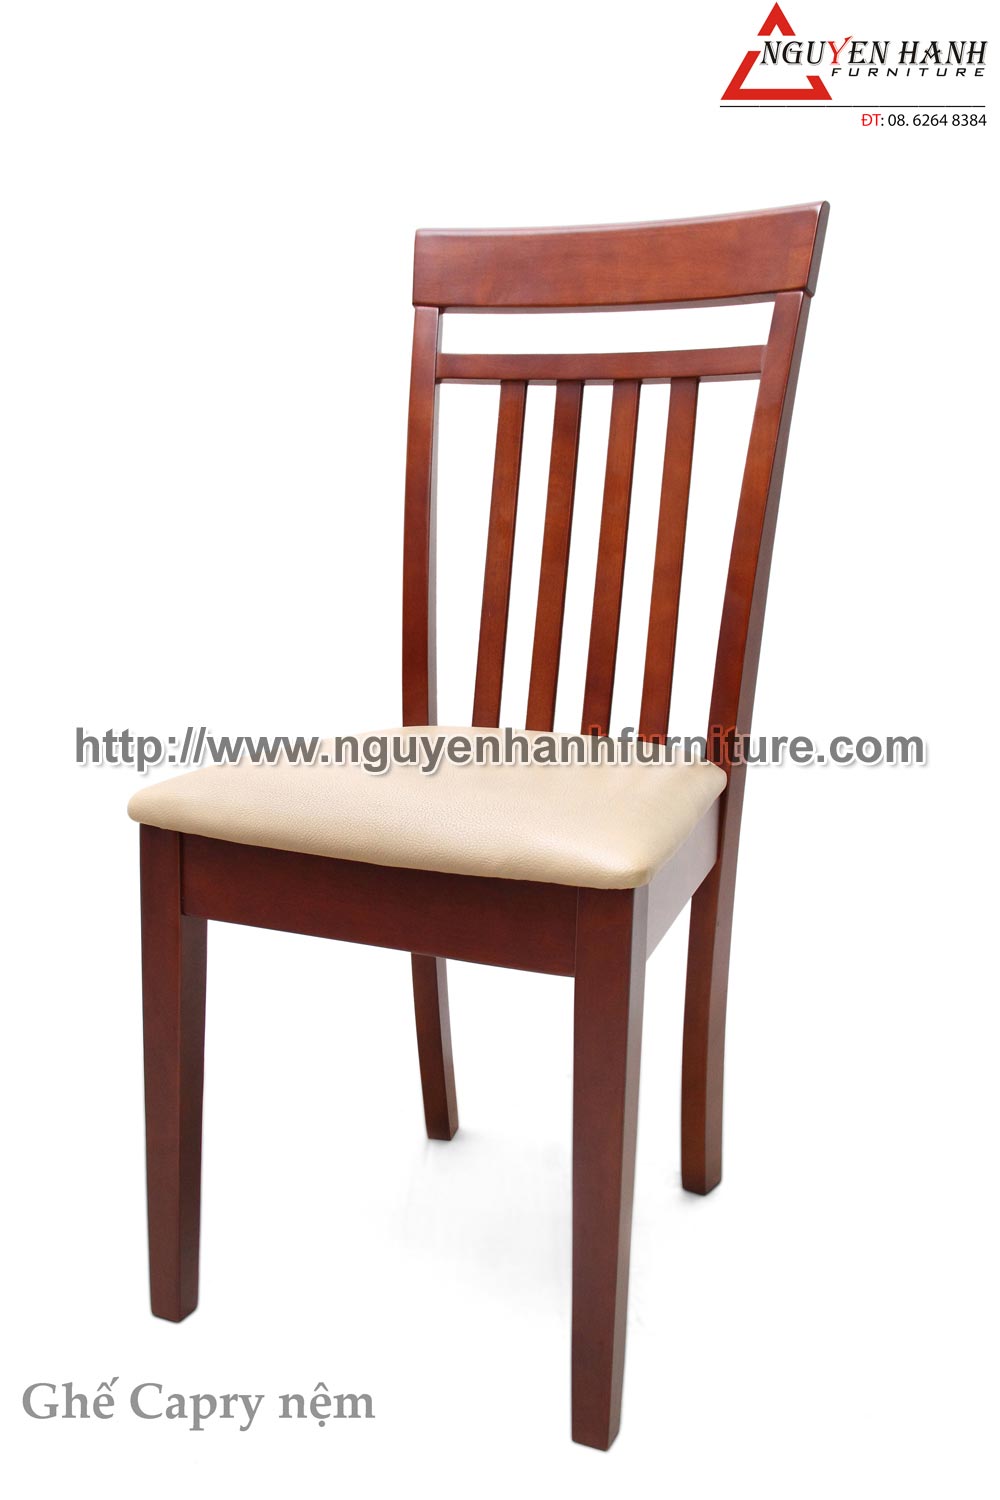 Name product: Capry chair - Dimensions:  - Description: Rubber wood, the mattress